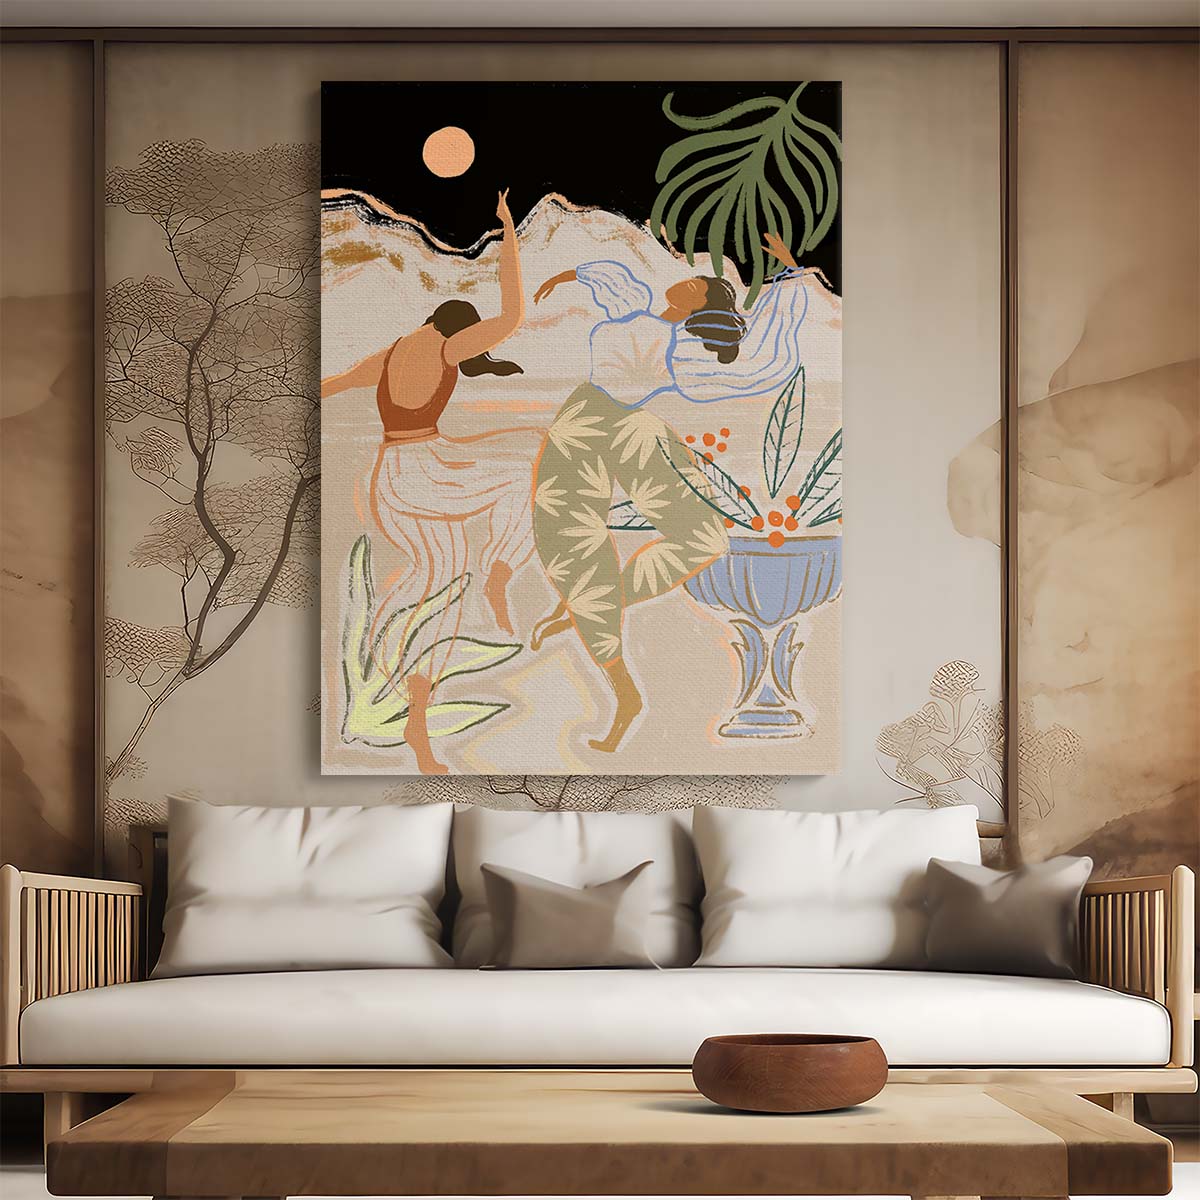 Joyful Dancing Women Moonlight Illustration with Tropical Botanicals by Luxuriance Designs, made in USA